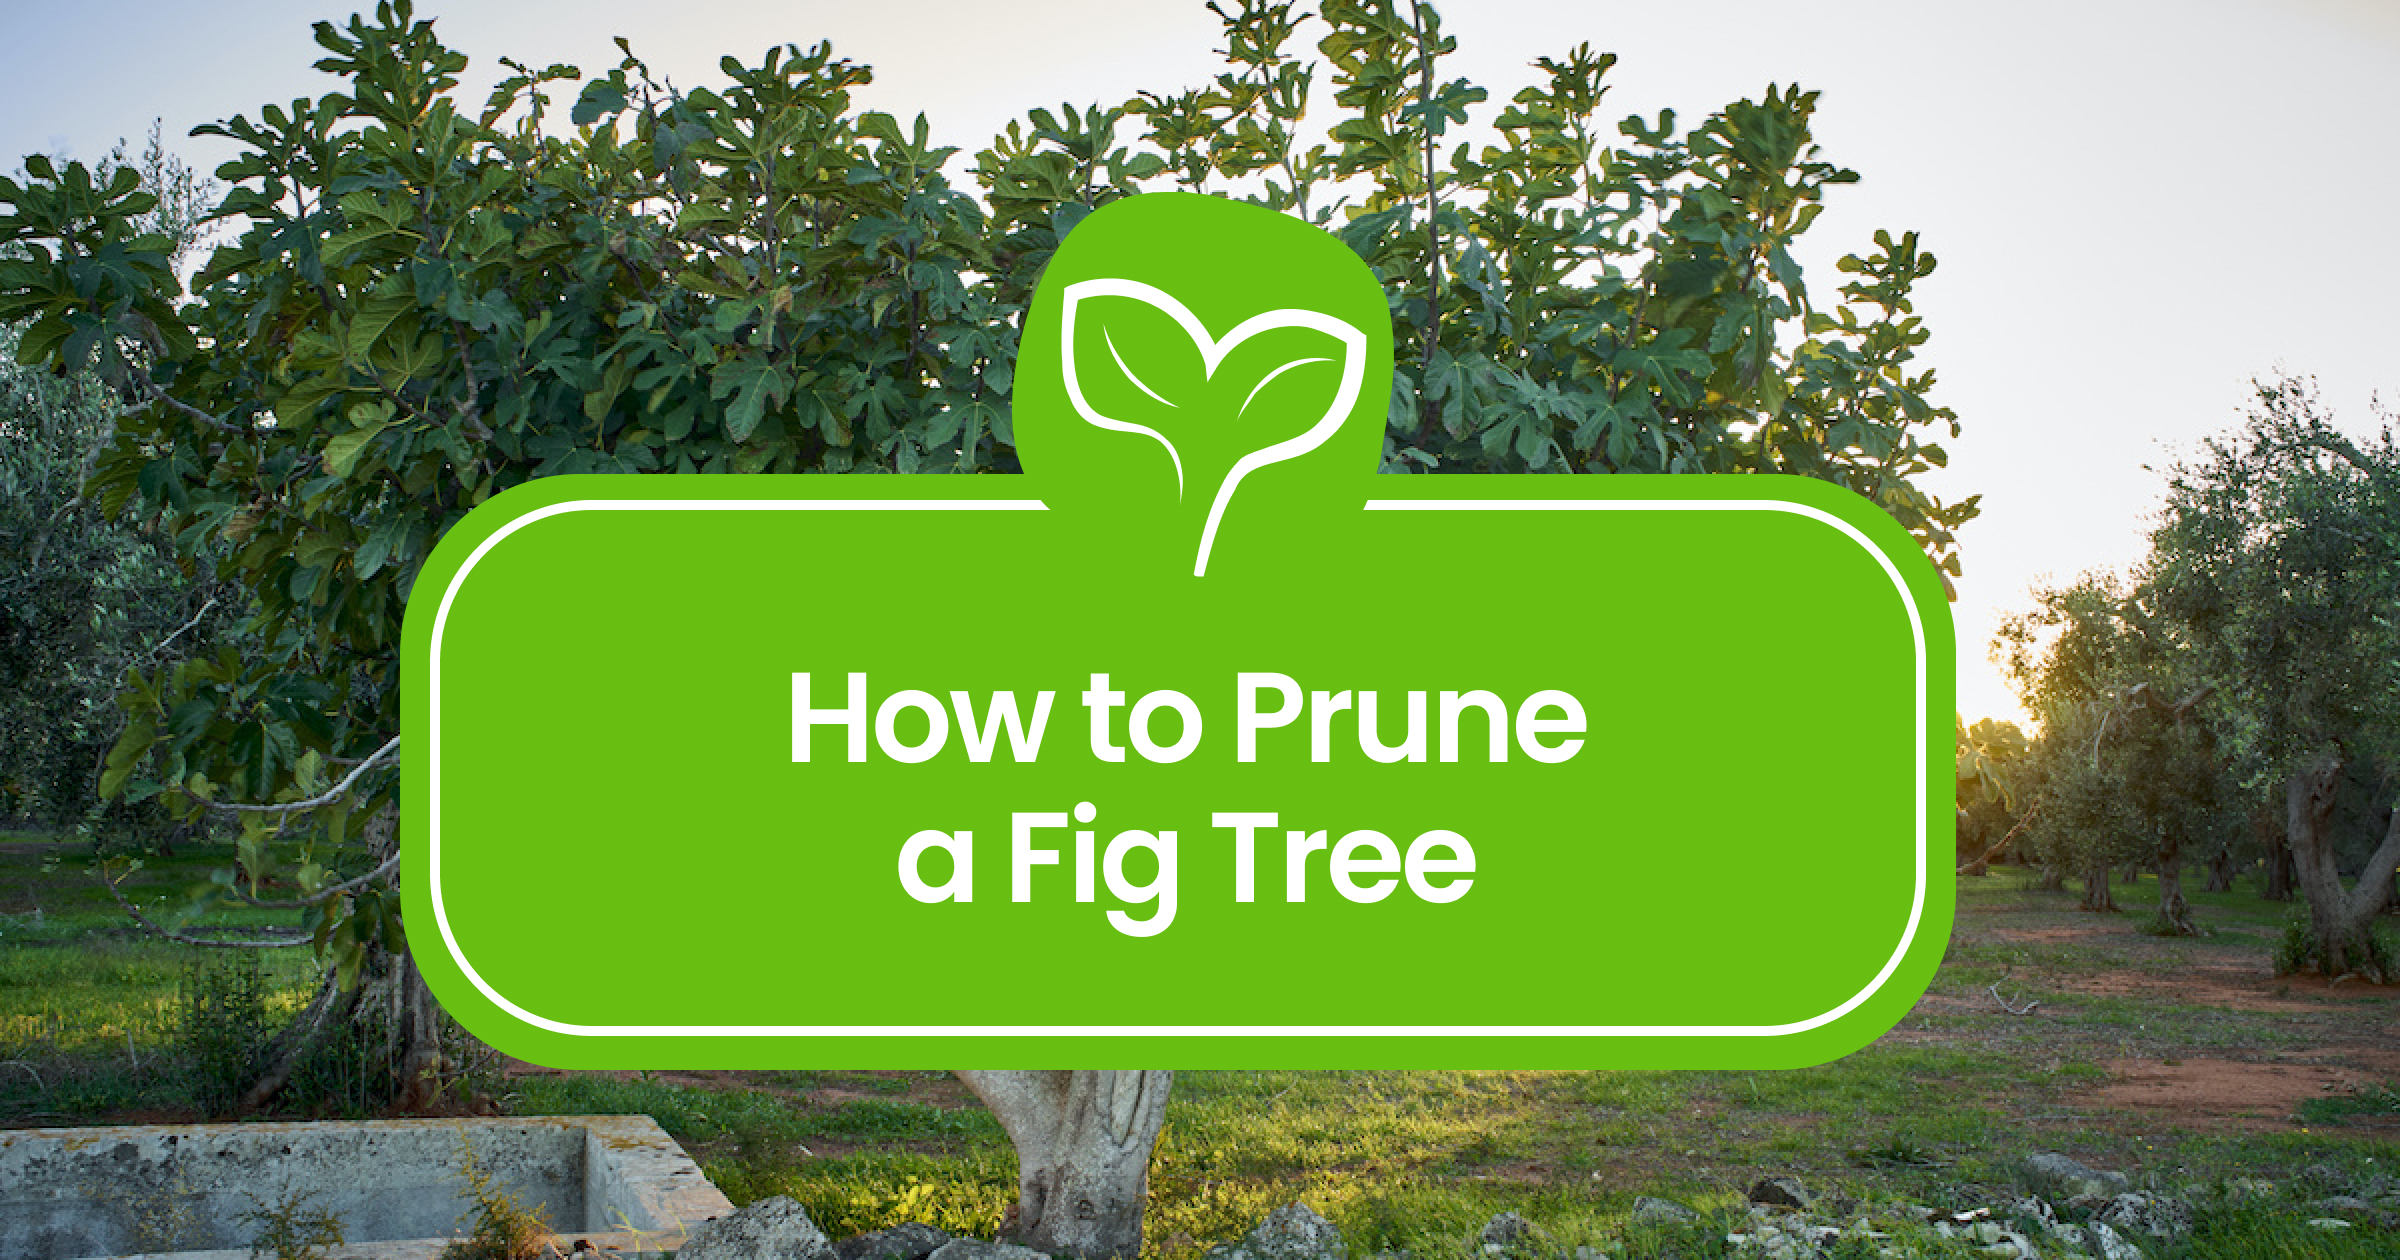 Pruning and Training a Fig Tree